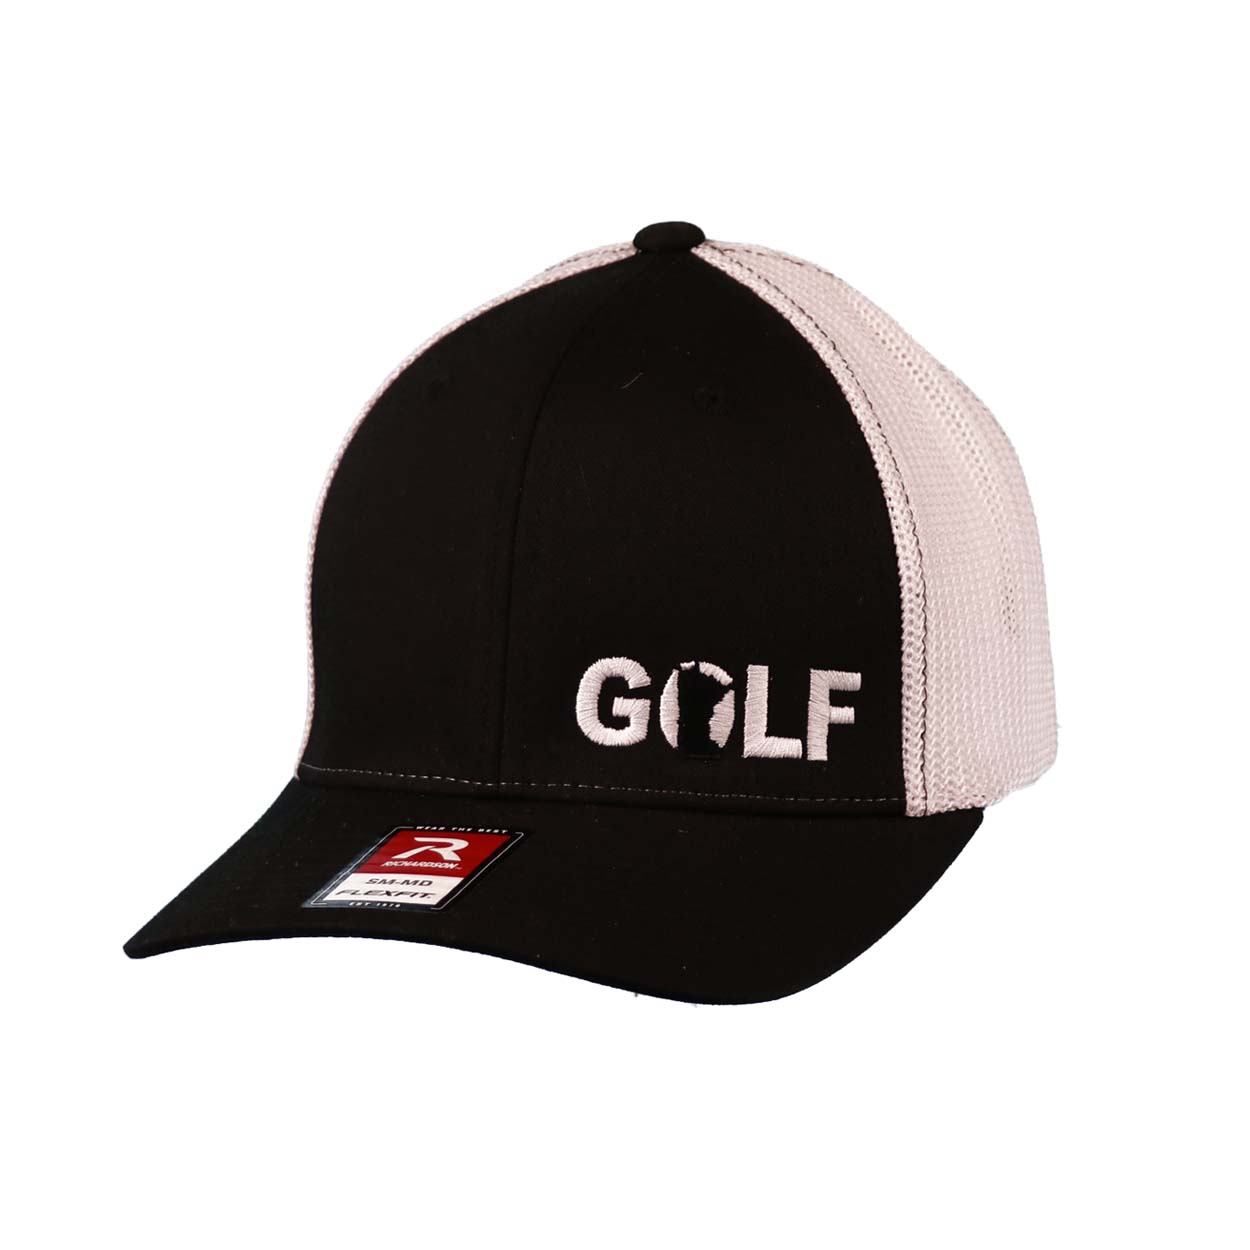 Golf Minnesota Night Out Pro Embroidered Flex Fit Trucker Hat Black/White